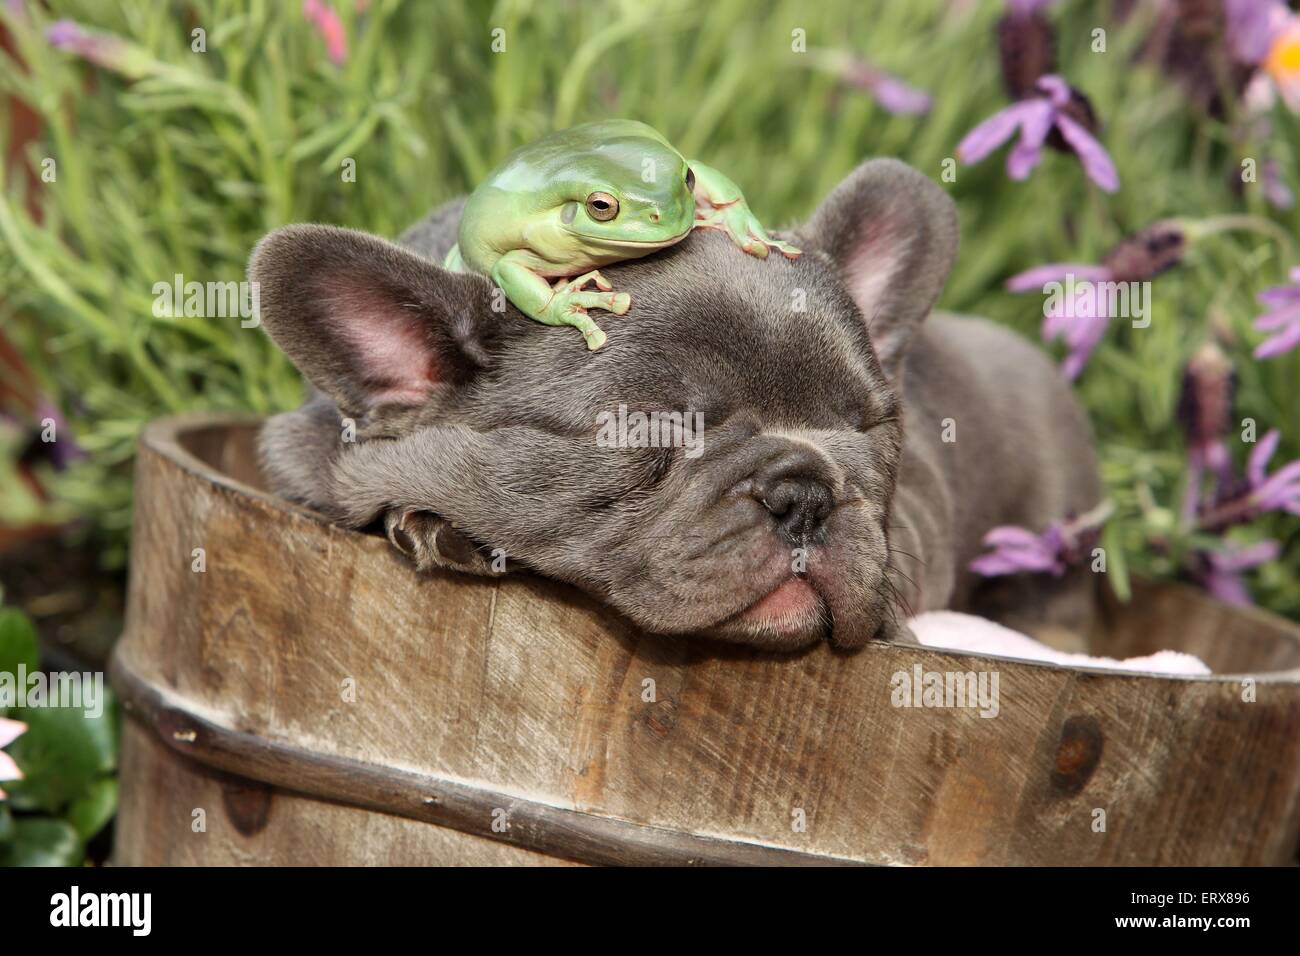 Puppy and frog Stock Photo